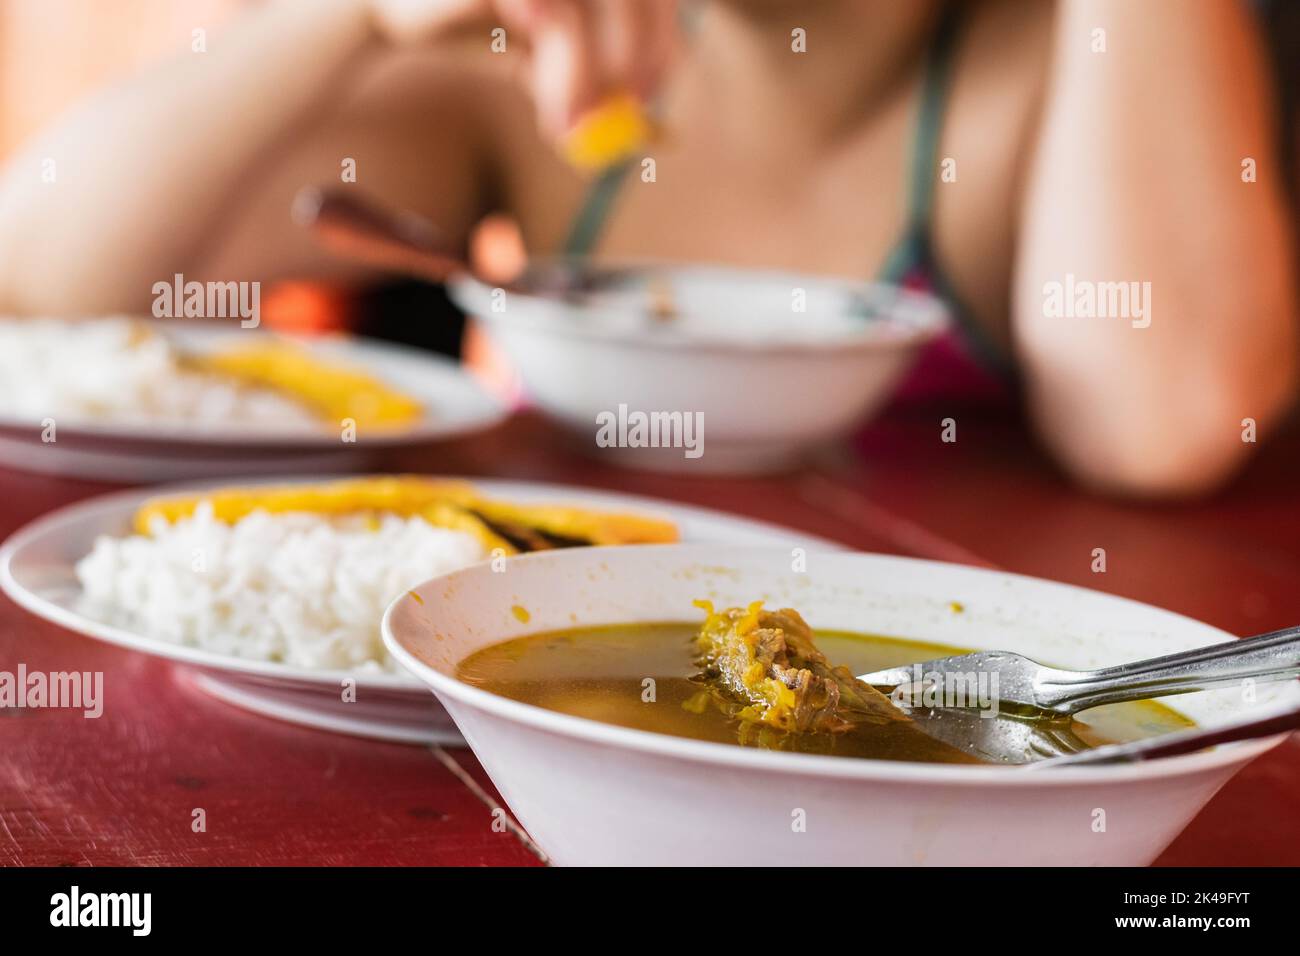 detailed view of a table served with a typical colombian breakfast, made with beef broth, in the background three white plates with rice and yellow ar Stock Photo